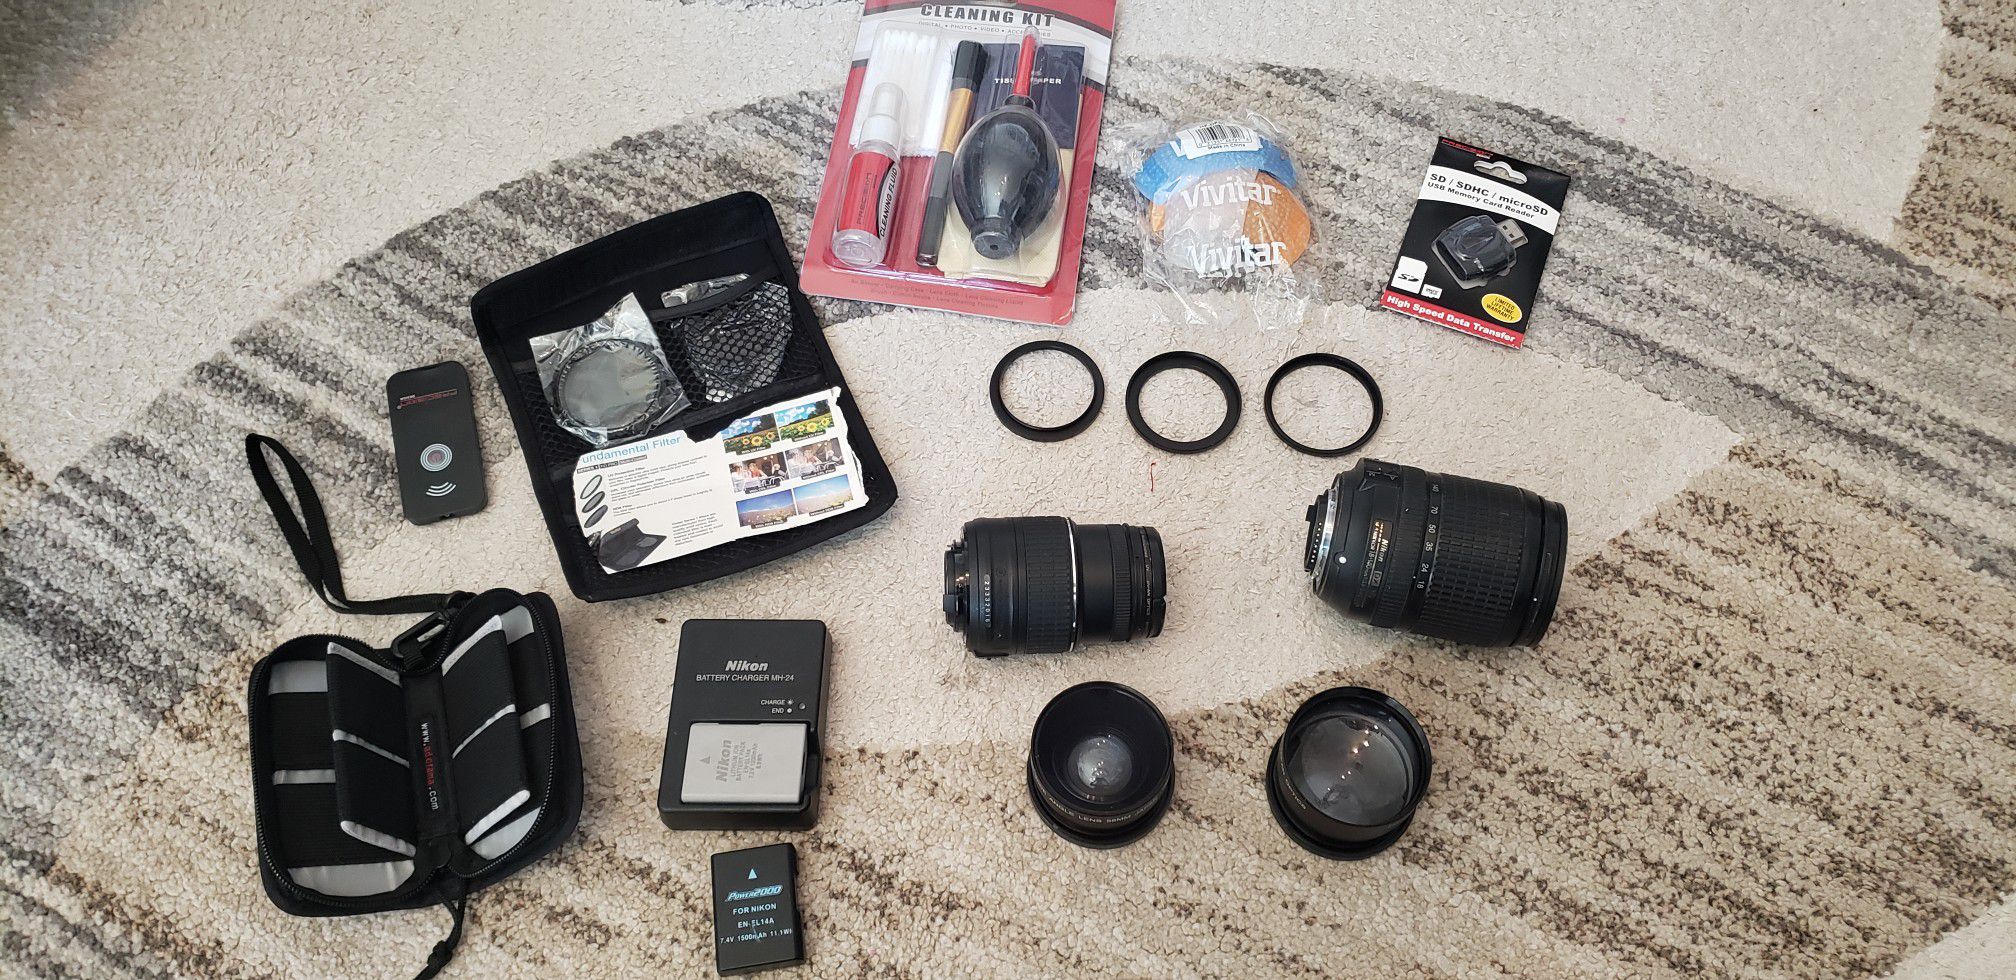 Nikon lenses and accessories for DSLR cameras